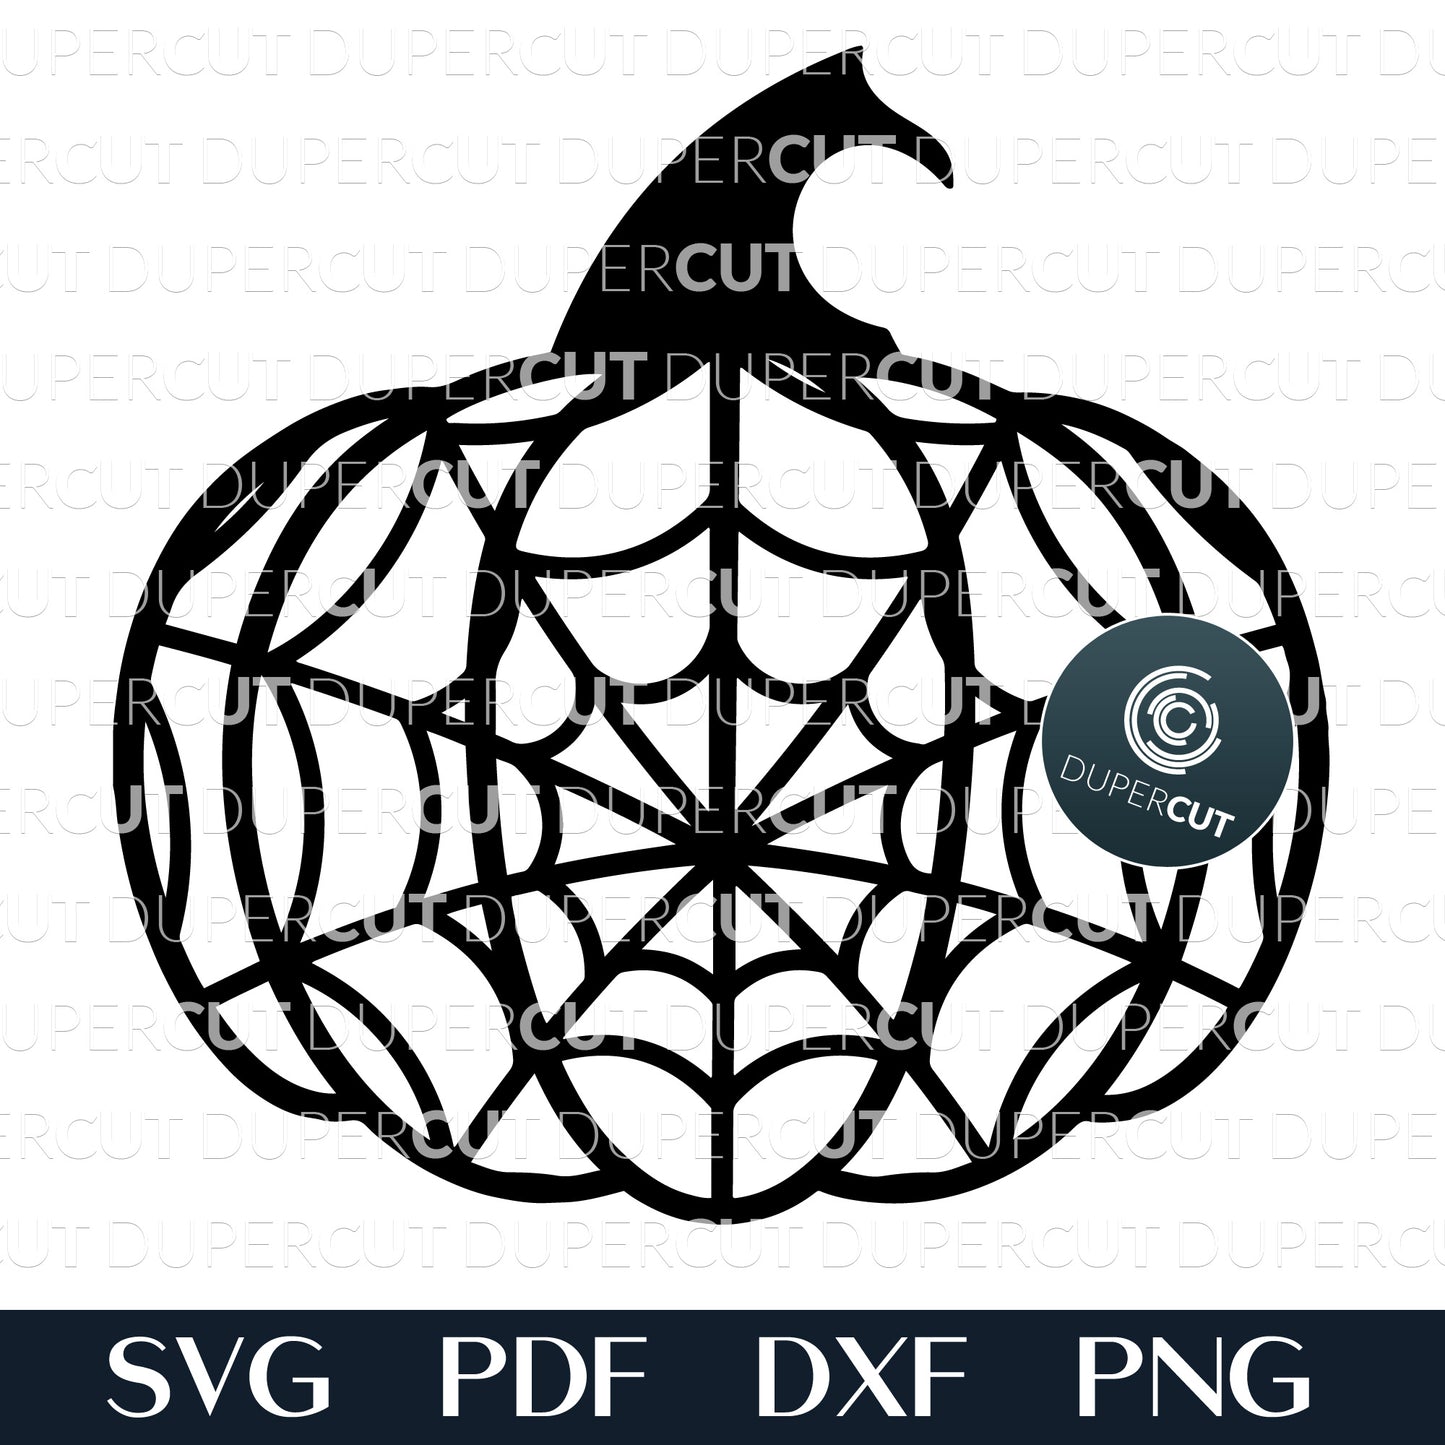 Halloween pumpkin with spider web pattern SVG PNG DXF paper cutting template for Cricut, Glowforge, Silhouette, laser and digital cutting machines by DuperCut